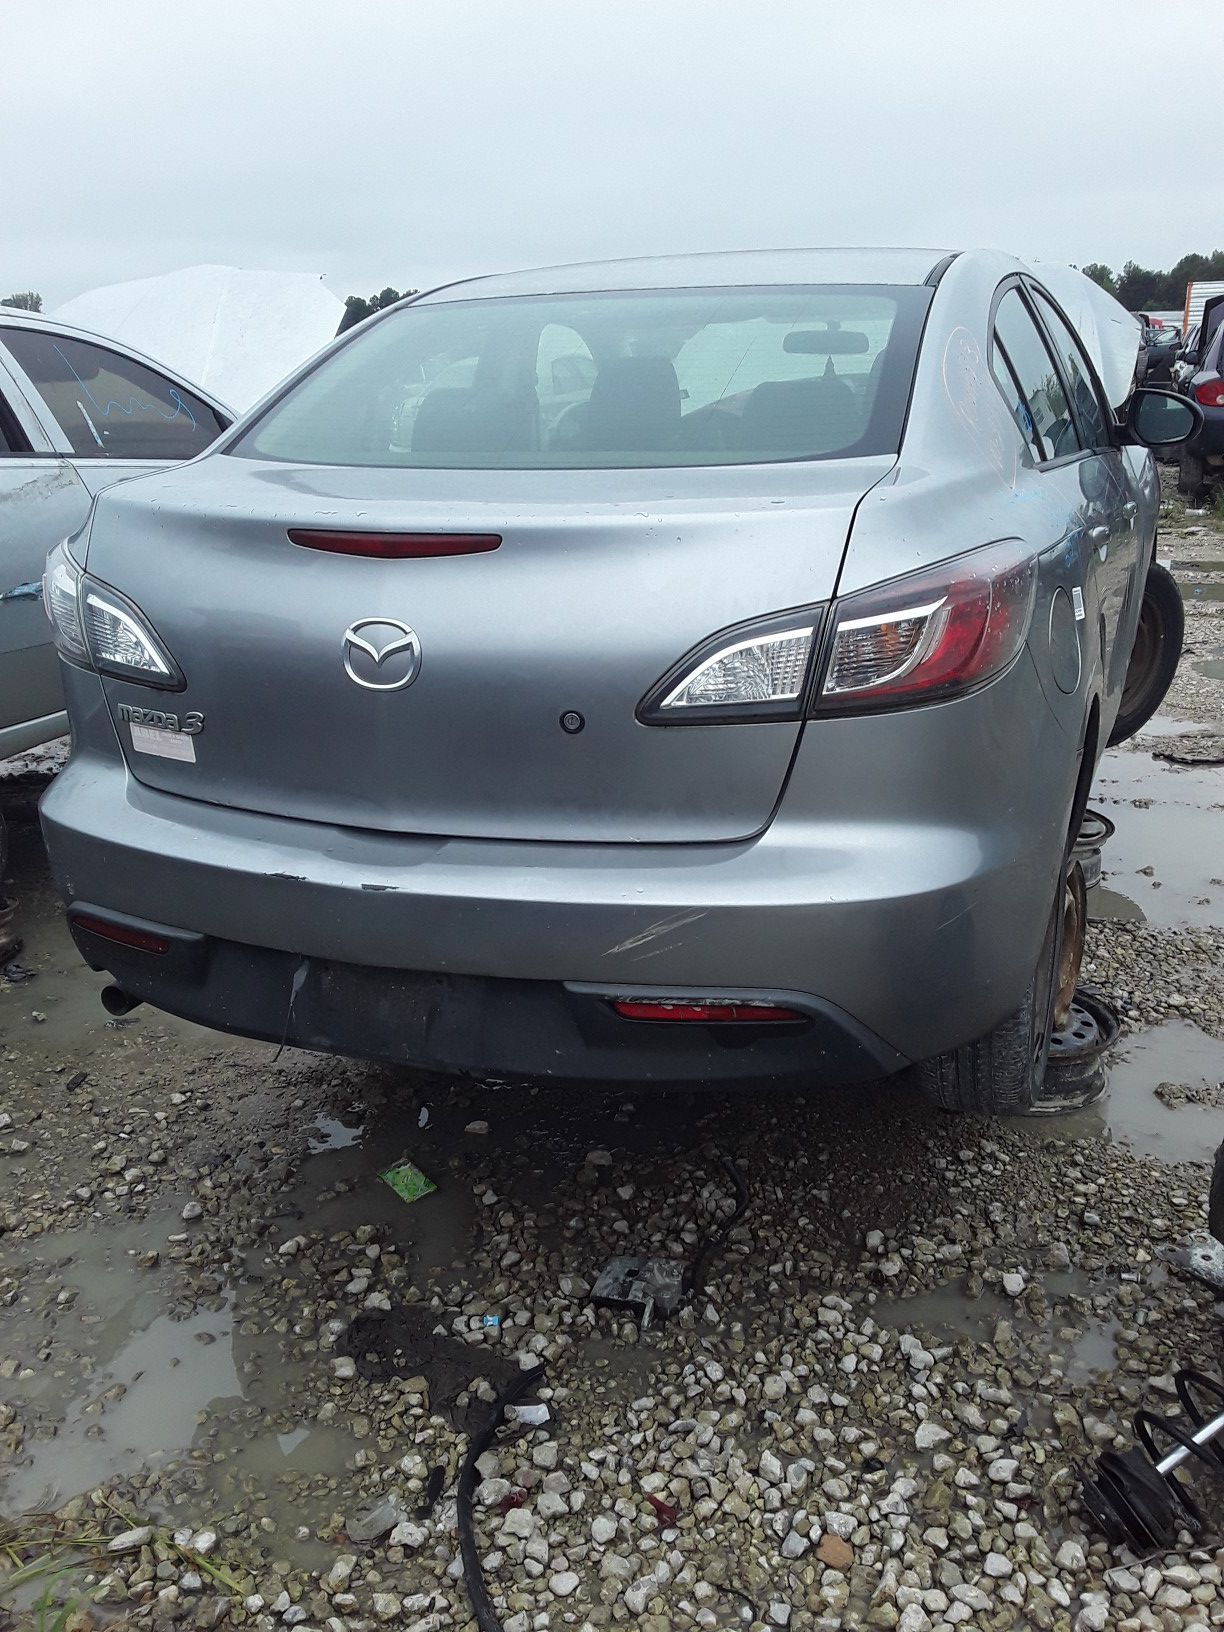 2011 Mazda 3 for parts